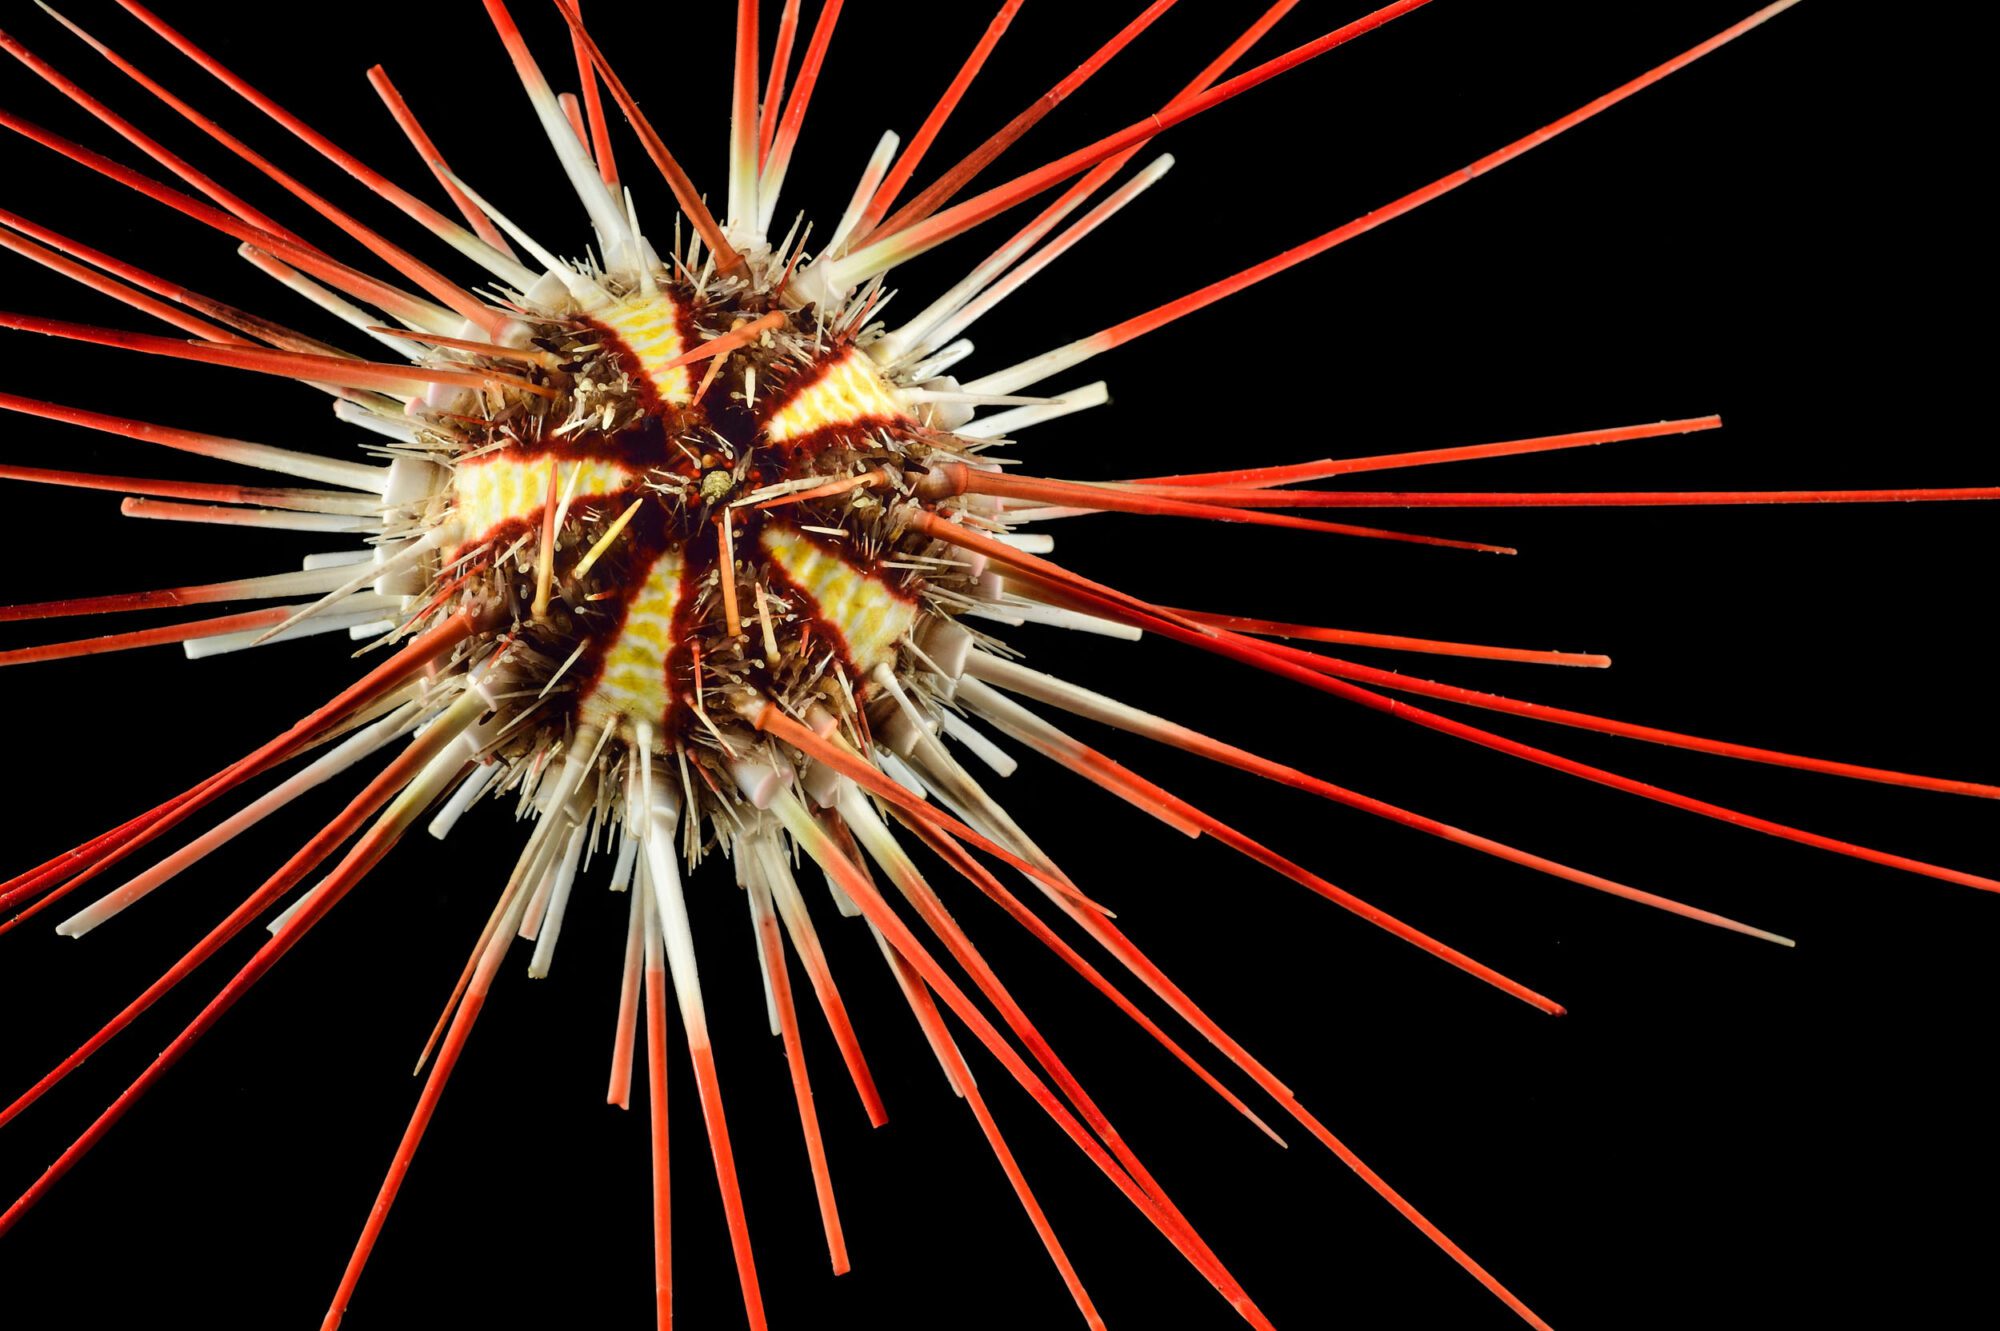 A spiky sea urchin with long red spines coming out at all angles. The central body is a brown ball and the spines are white and yellow where they meet the body